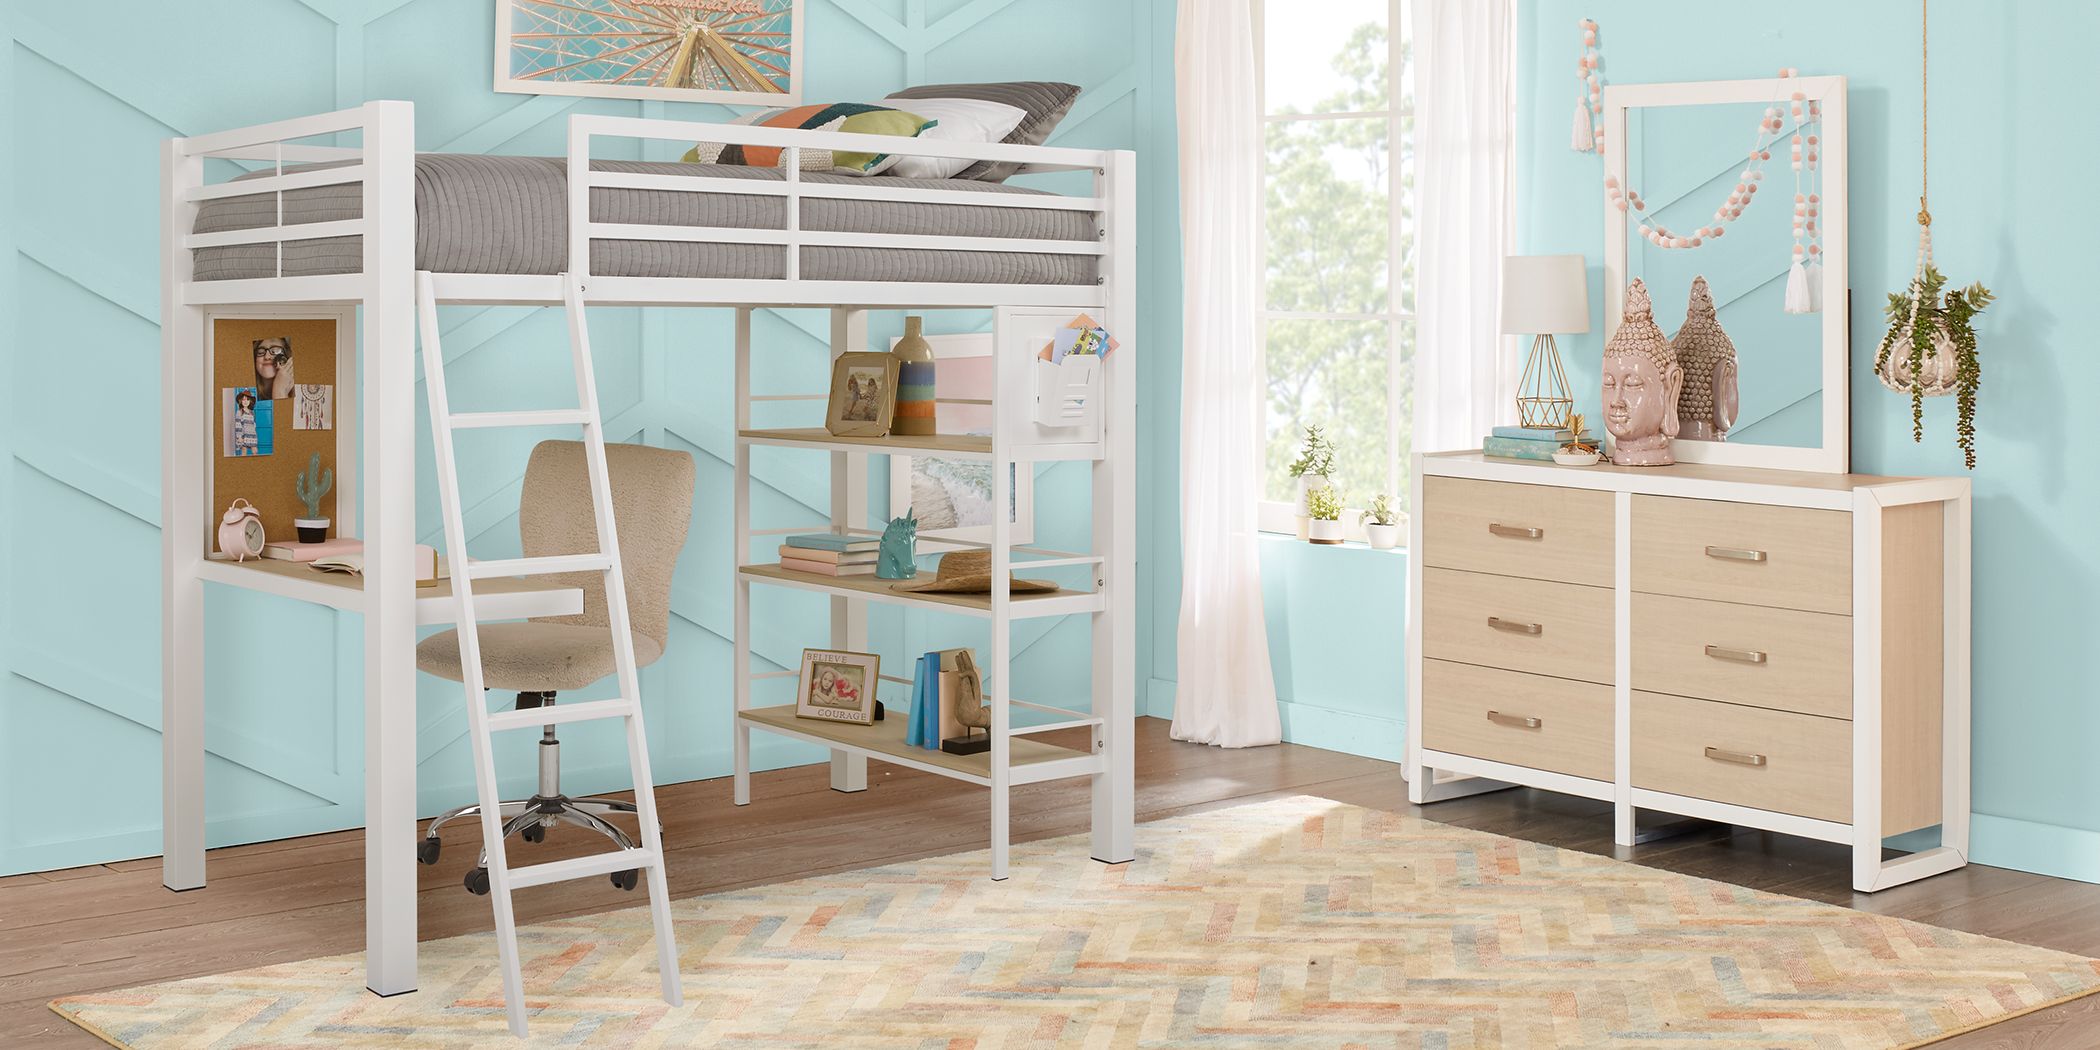 Go Bunk Bed With Futon Maldabeauty, Rooms To Go Full Over Futon Bunk Bed